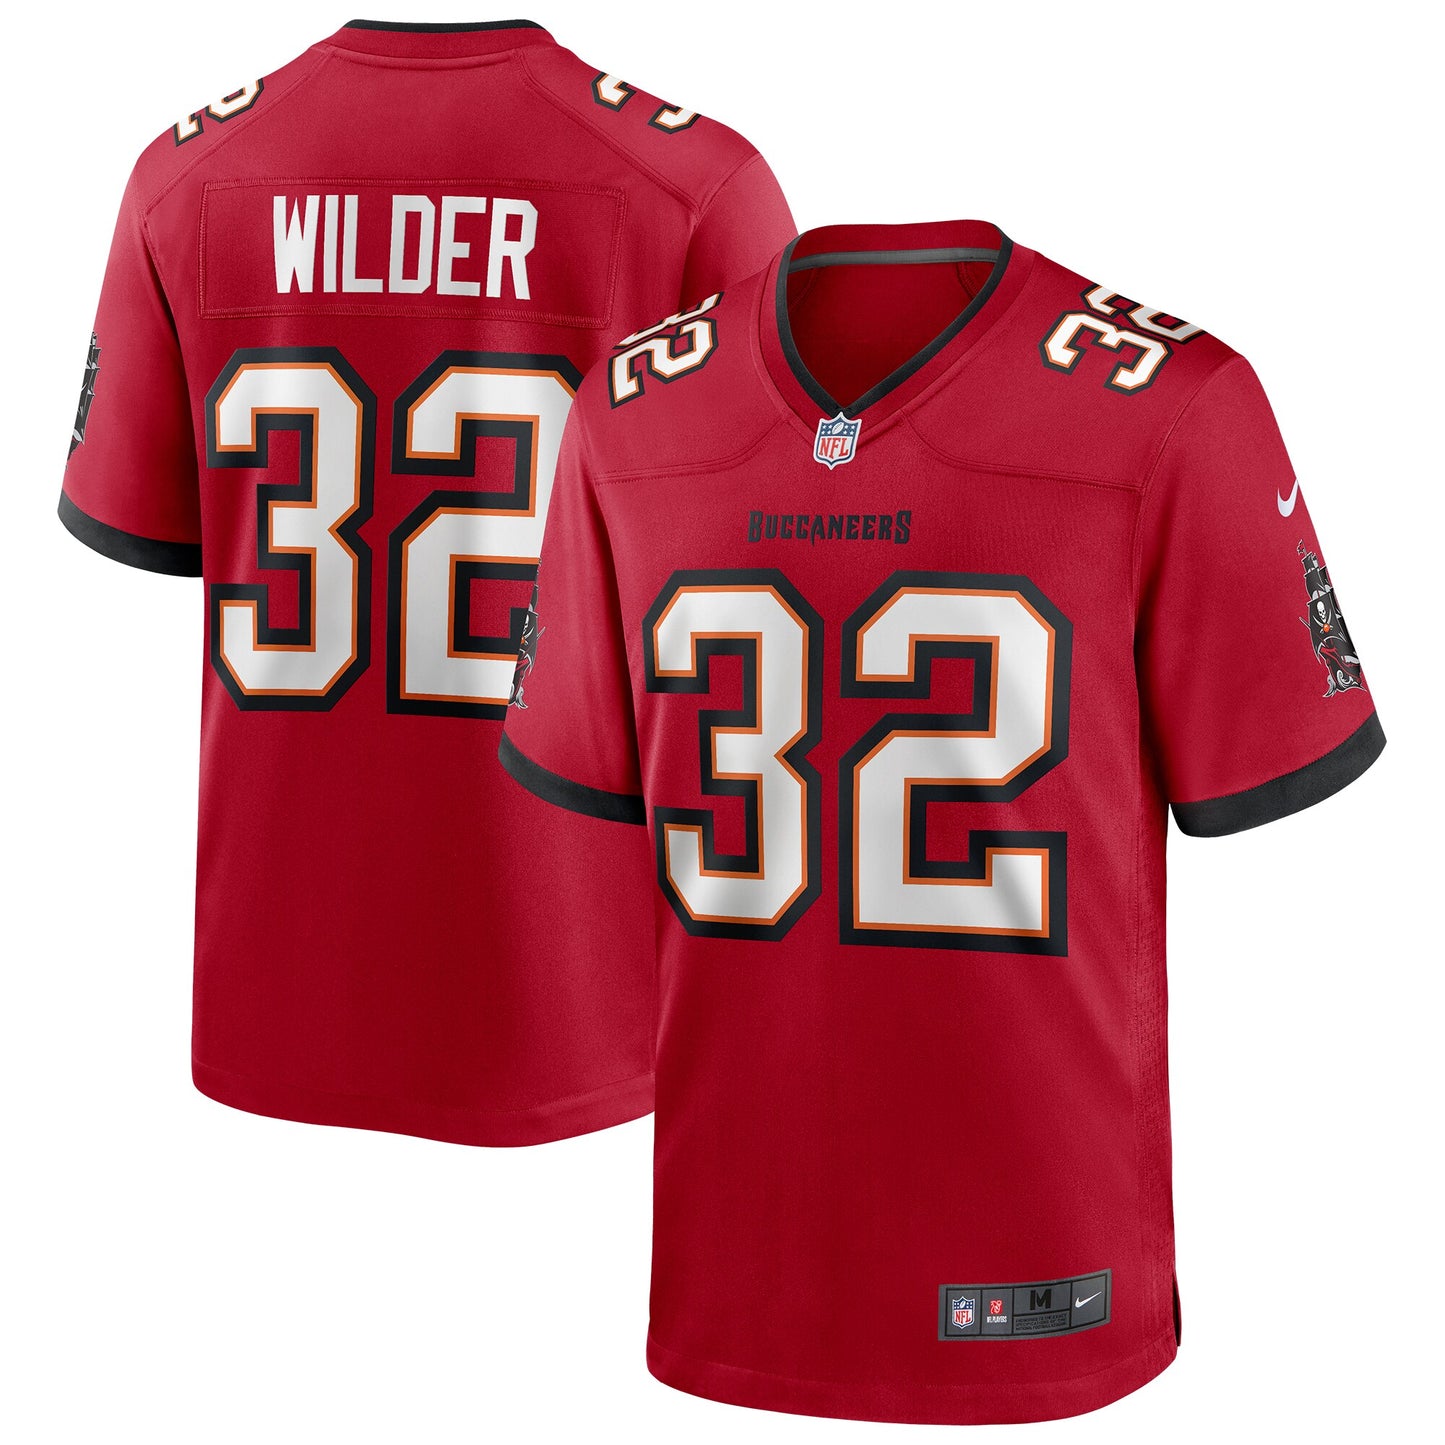 James Wilder Tampa Bay Buccaneers Nike Game Retired Player Jersey - Red